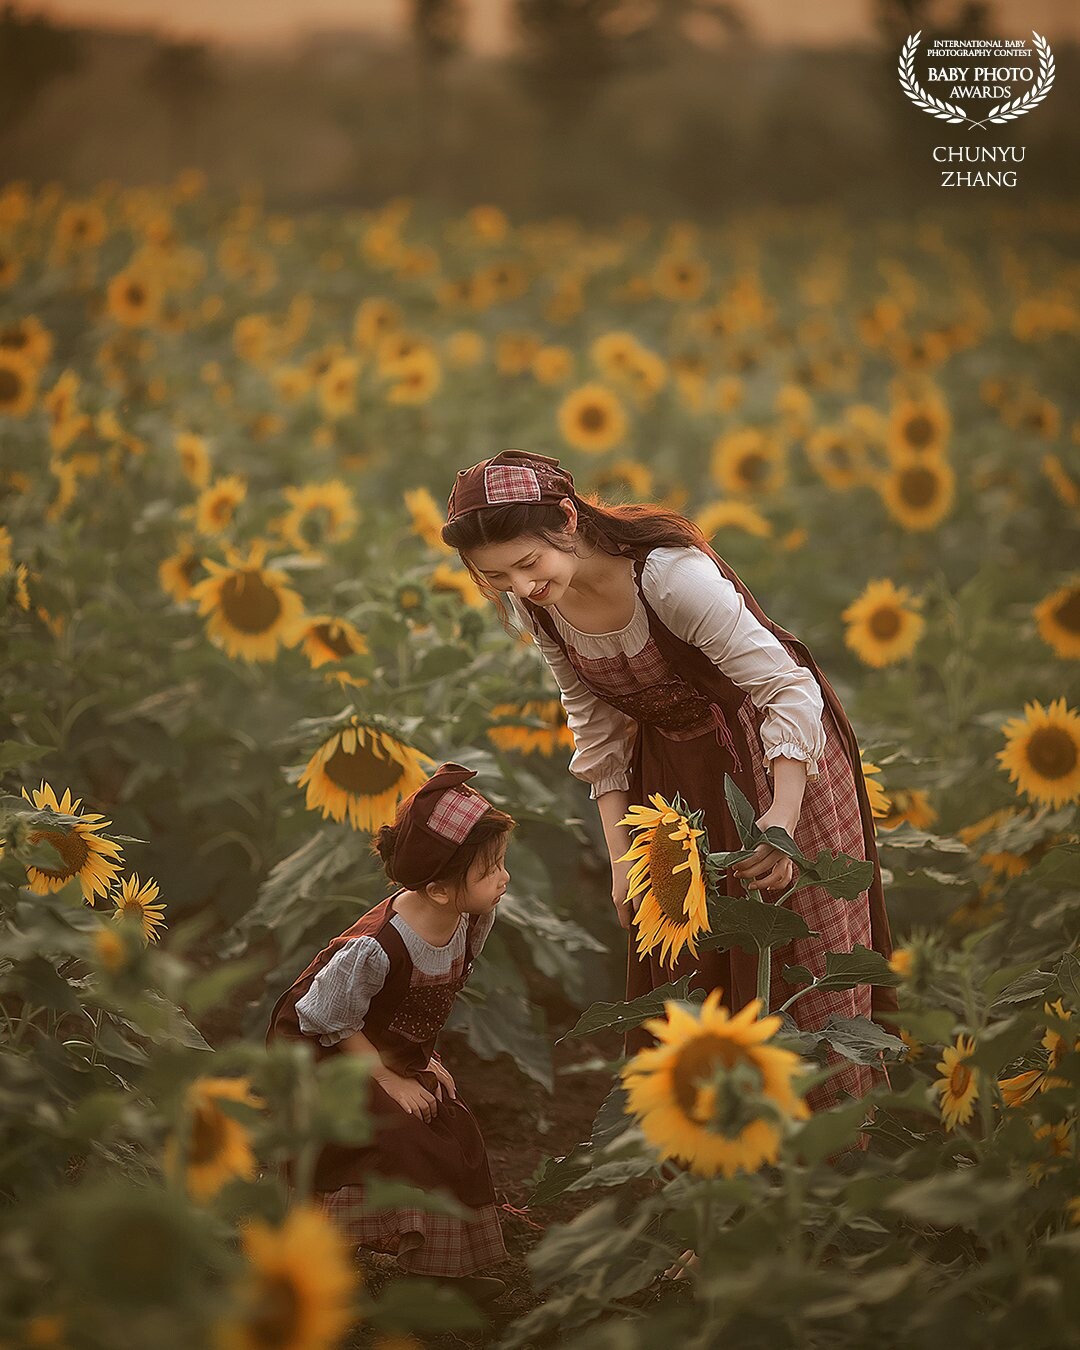 Mom and her little girl played together in sunflower field.The mother took a sunflower flower and said to the baby, this will grow into delicious nuts in the future, do you know what it is?